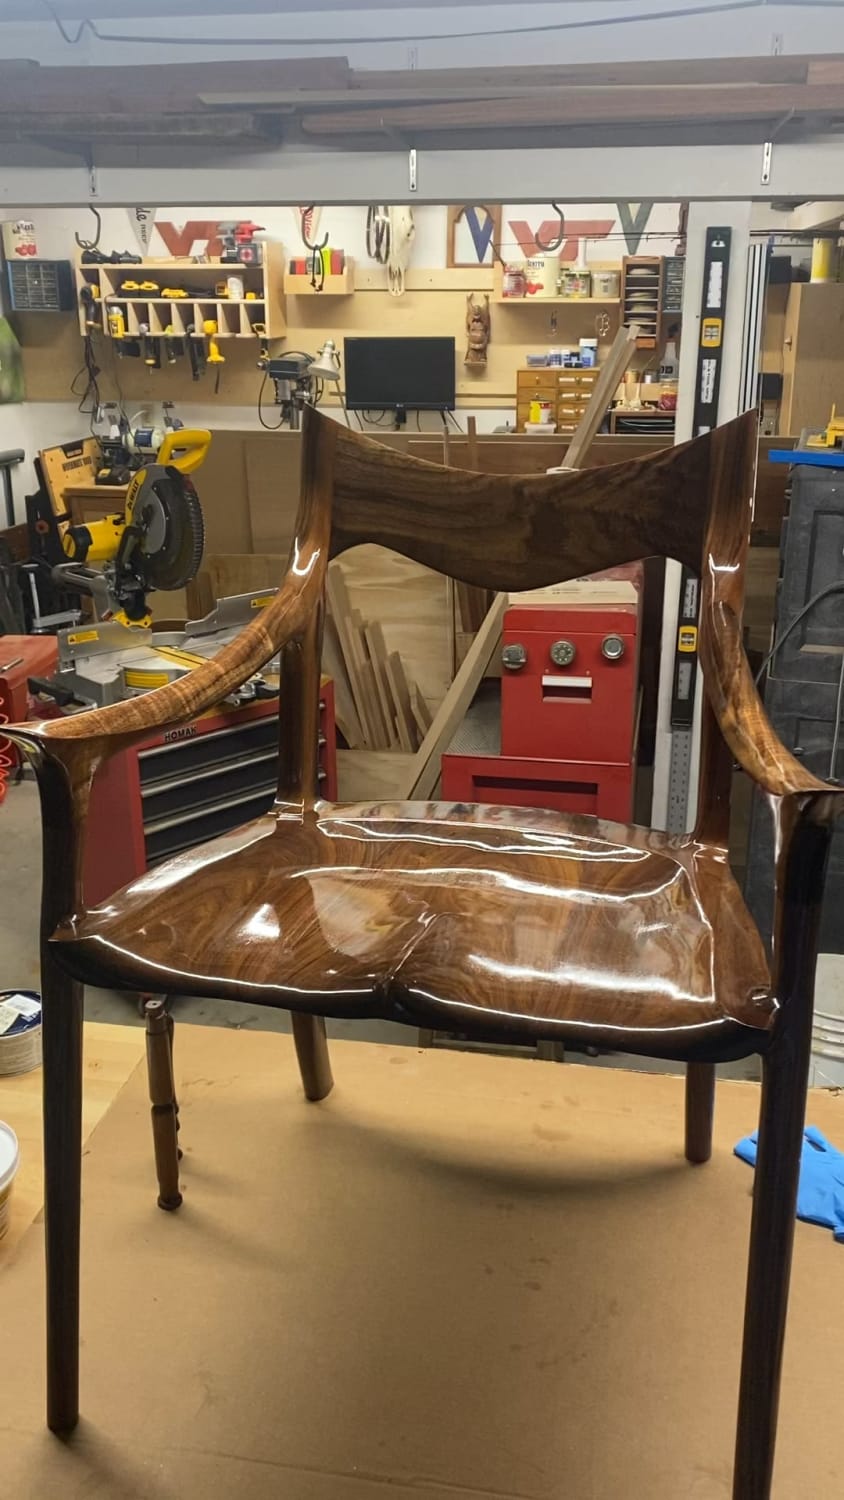 Maloof styled chair by a beginner. Lotta help at Palomar College. Check out the CFT program there…